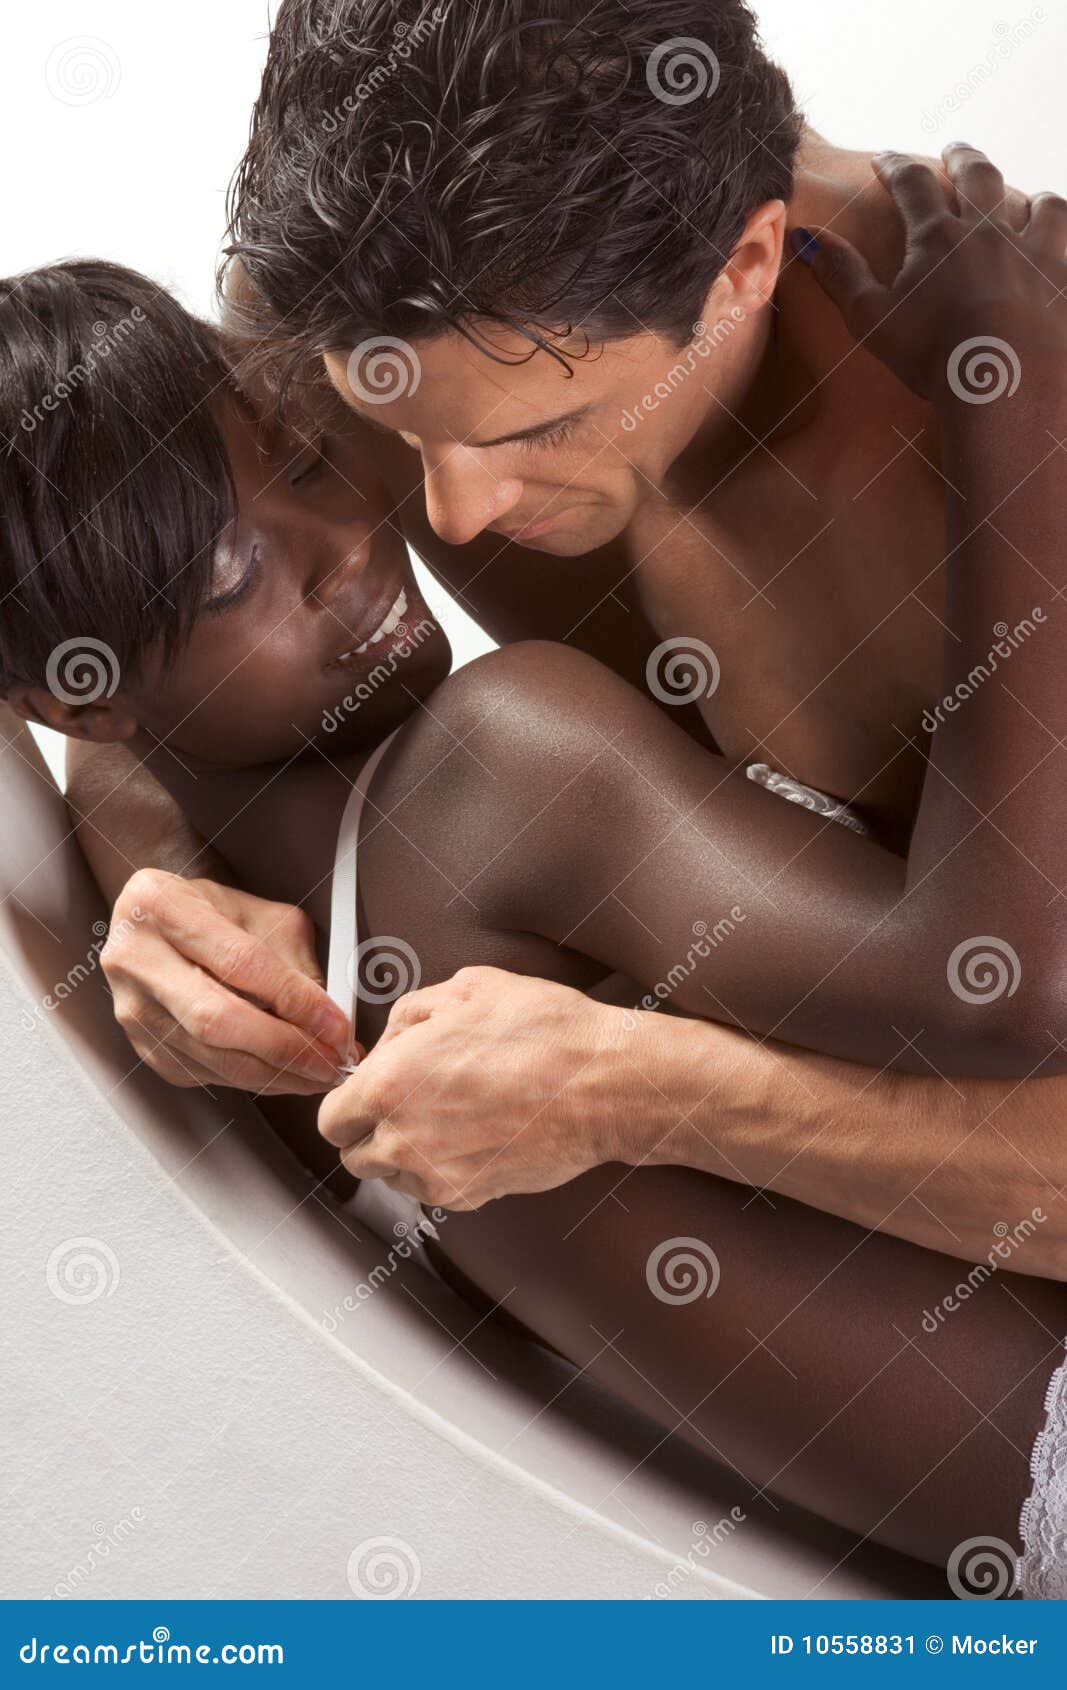 Man making love with a woman